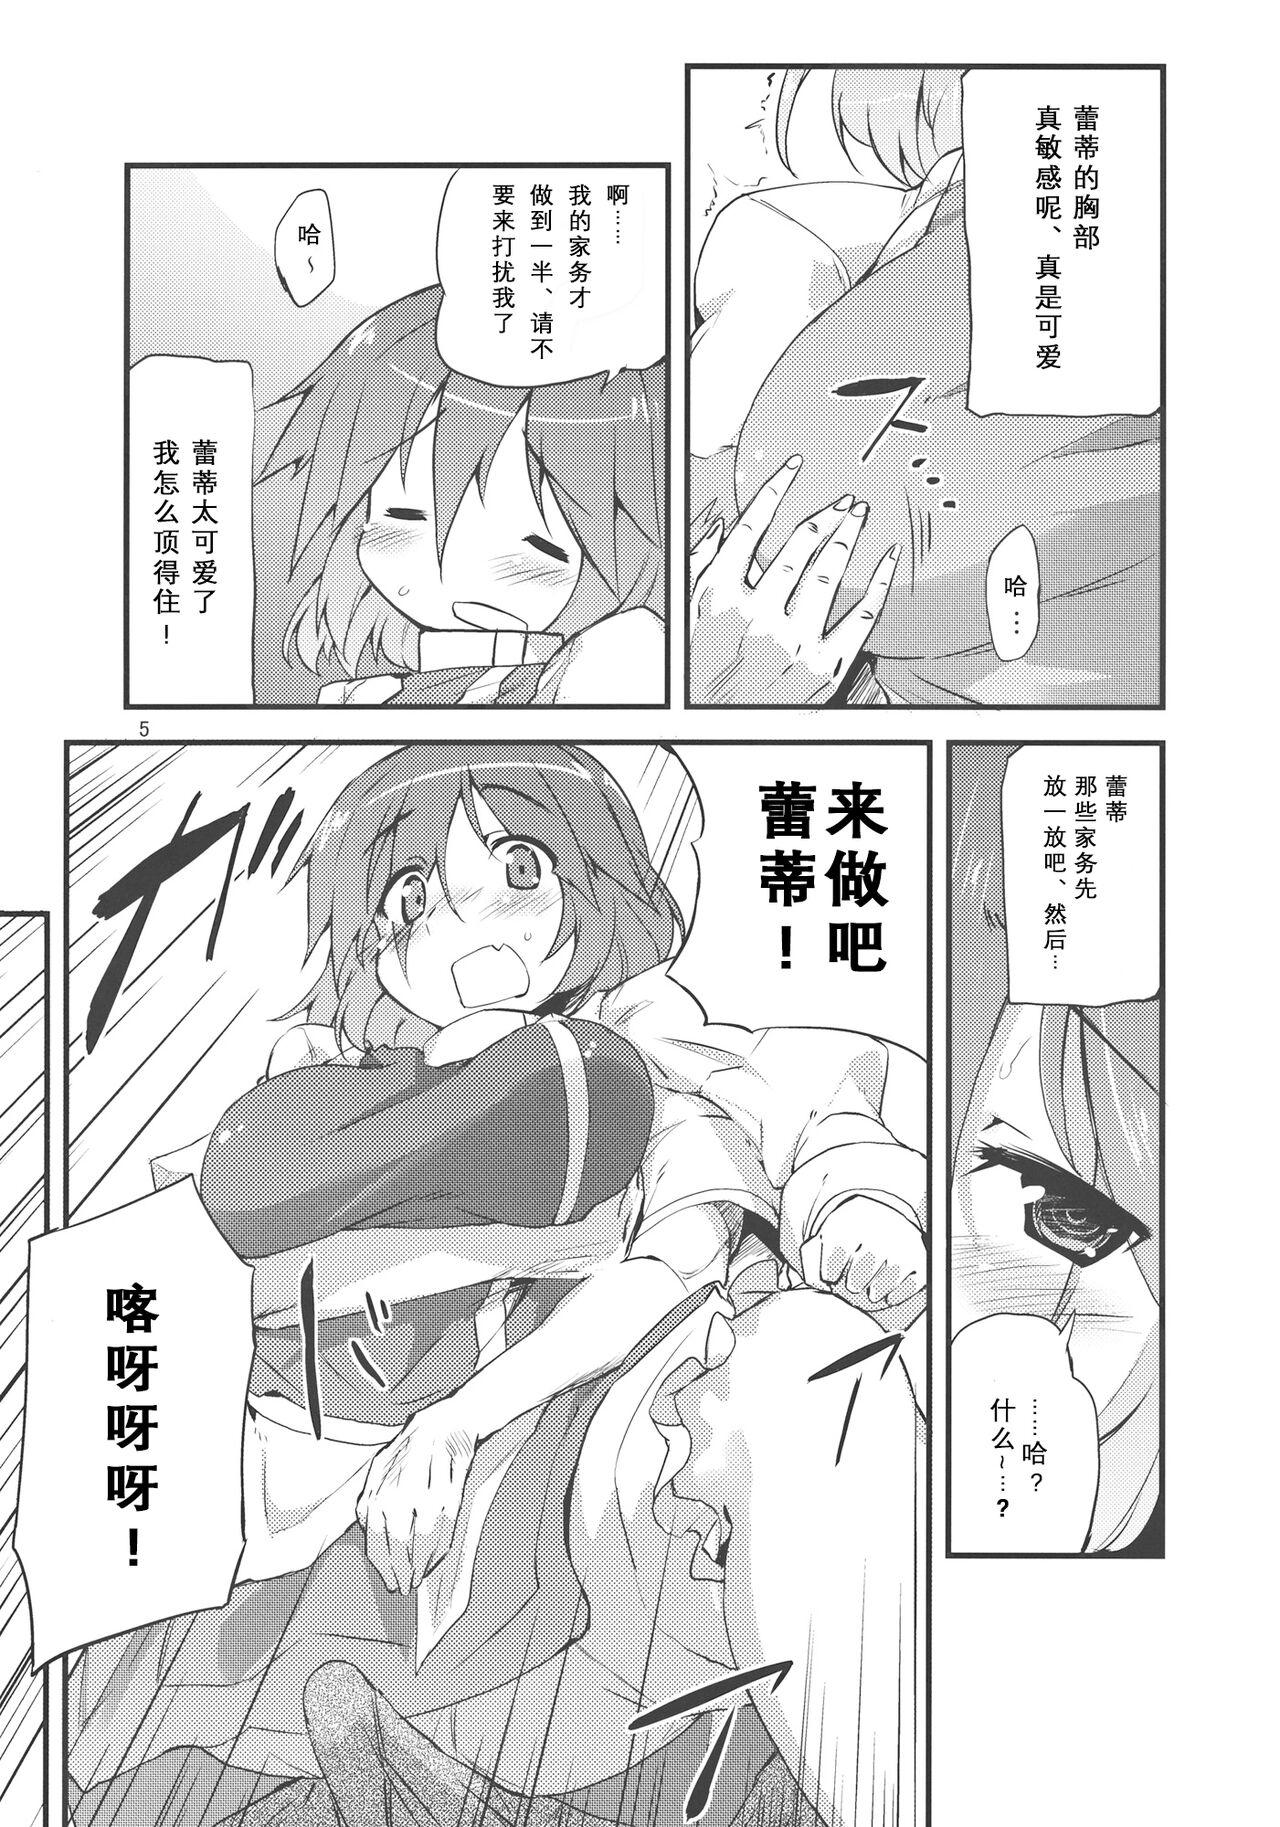 Smooth x Letty | ×蕾蒂 - Touhou project Porn Pussy - Page 5